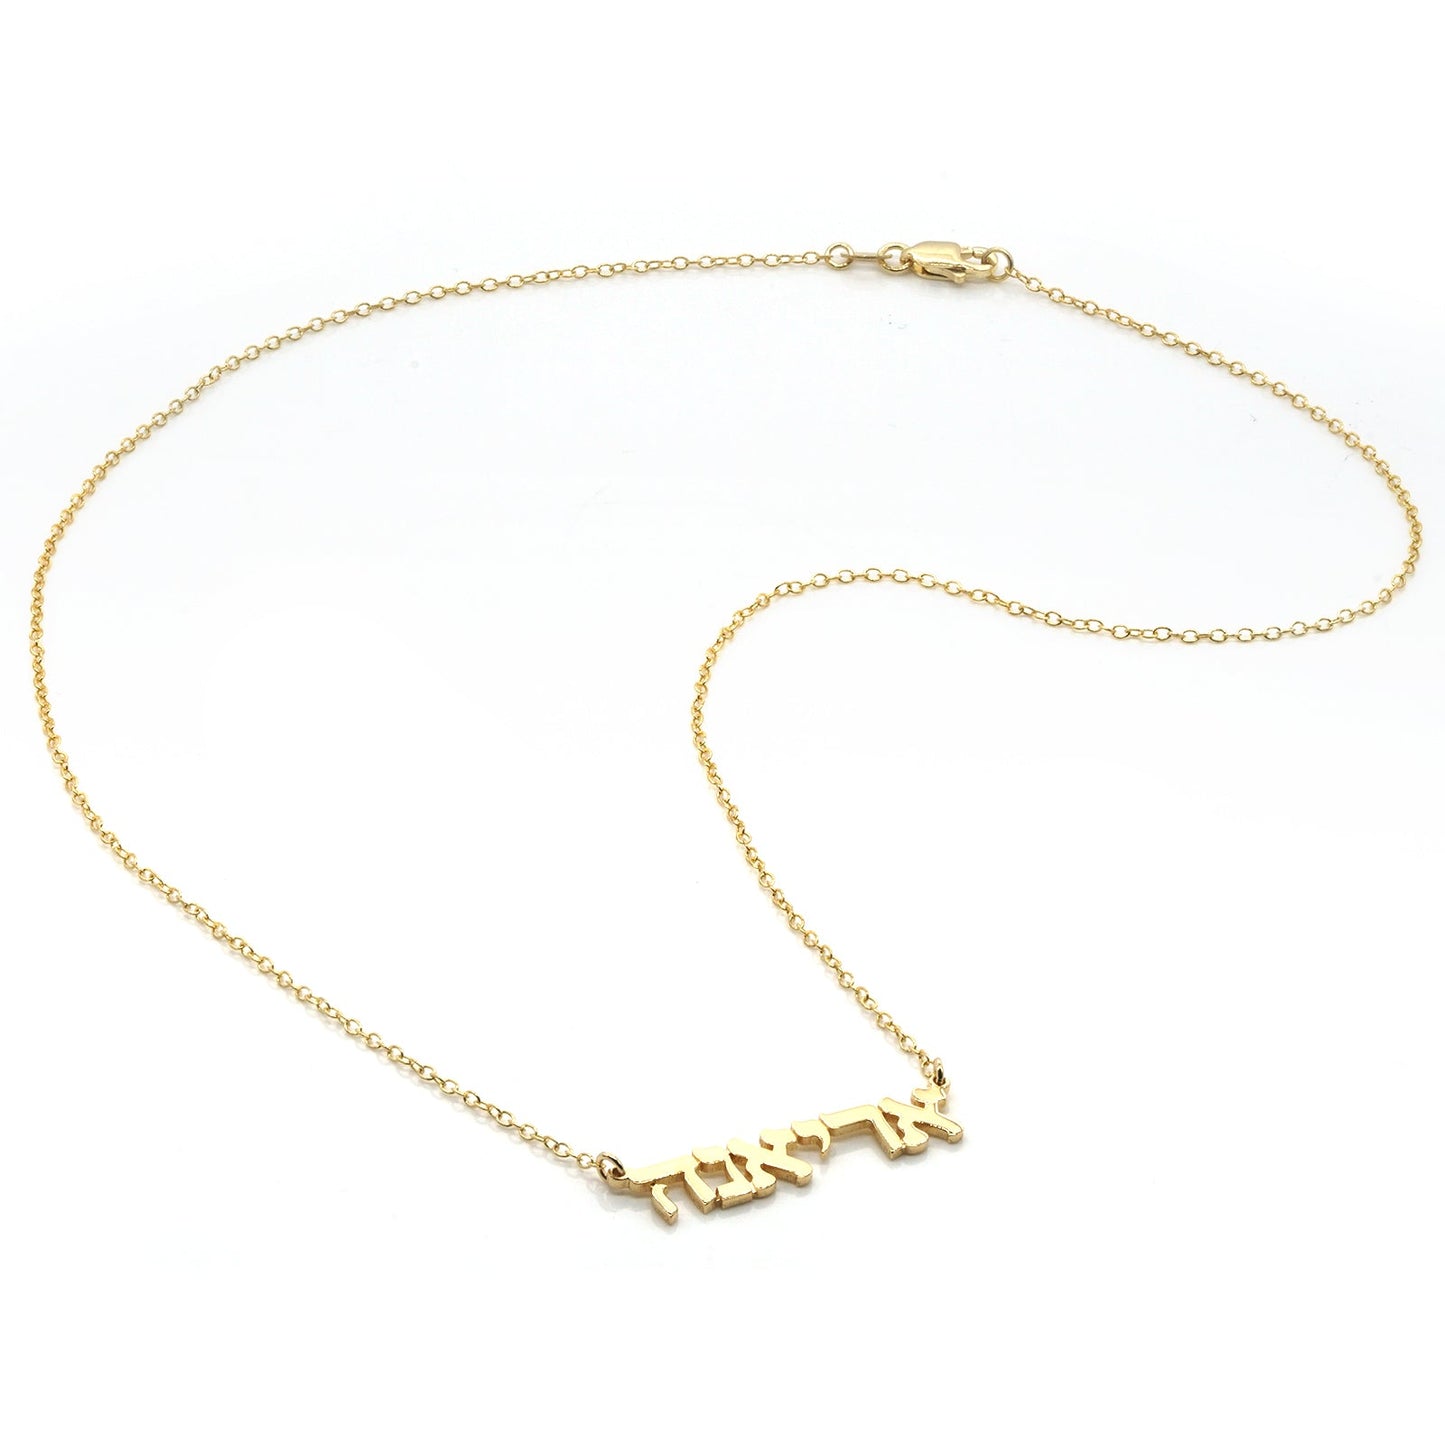 Sterling Silver Custom Nameplate with Hebrew Block Text | Necklace